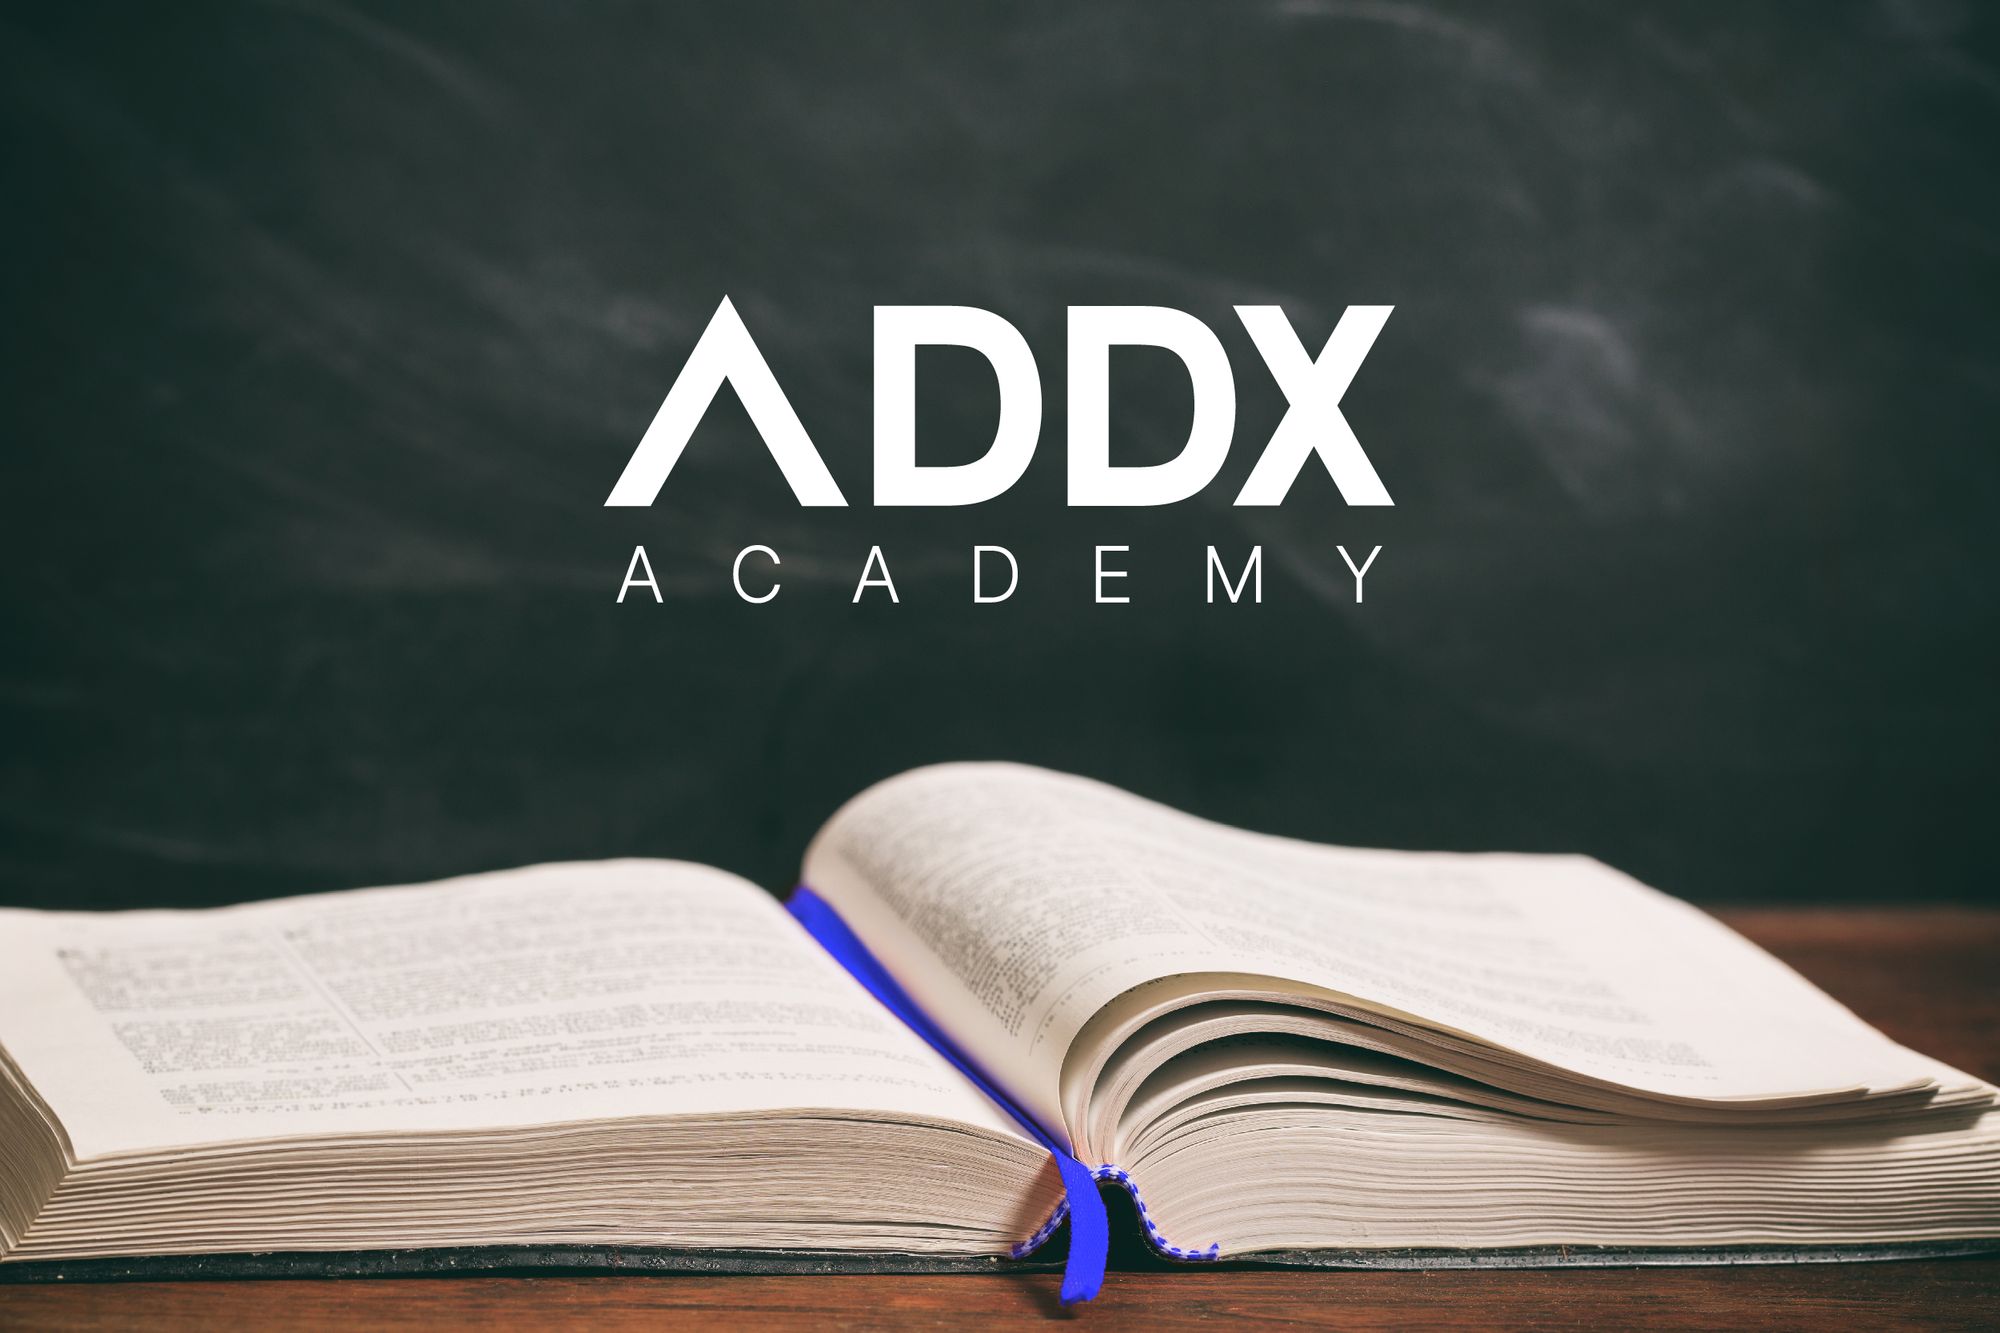 ADDX Academy: What Is A Private REIT?